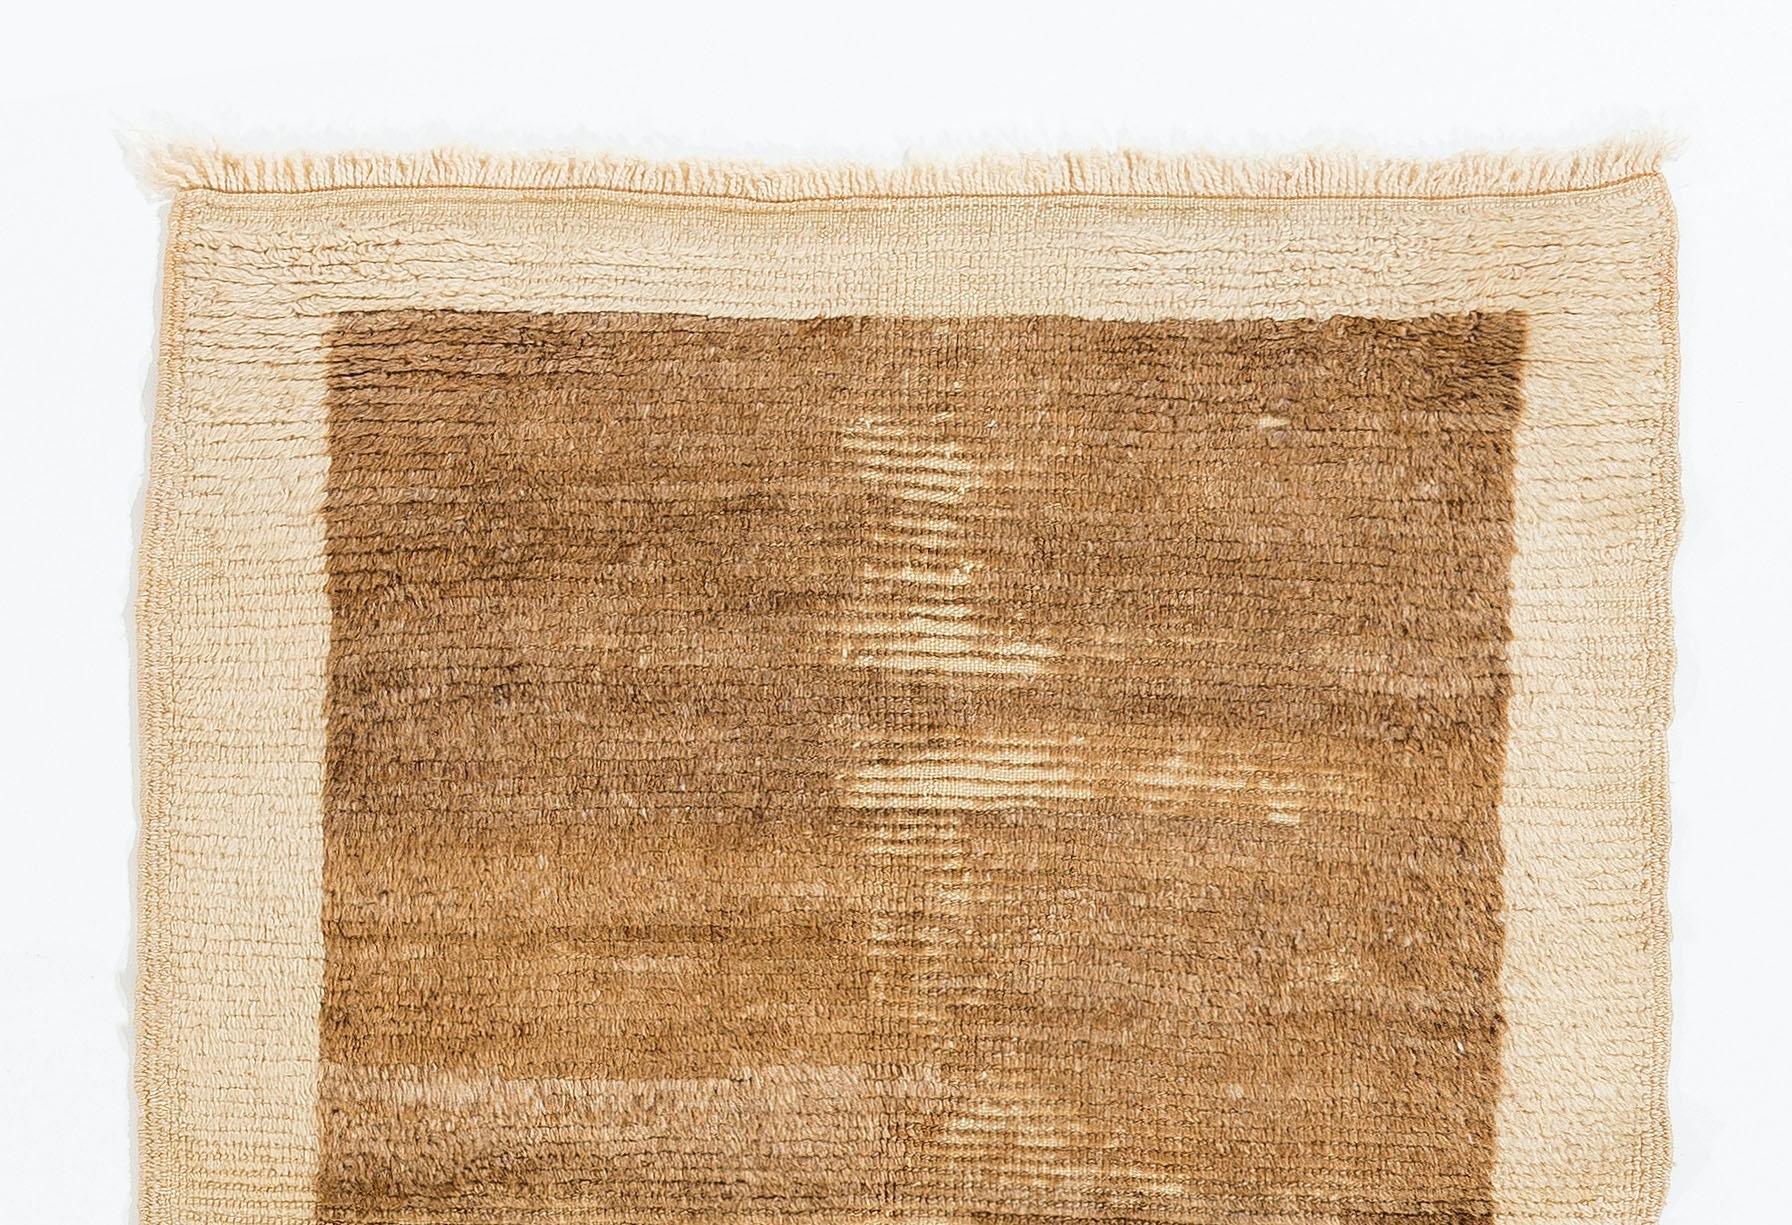 A vintage hand-knotted Tulu (Turkish word for thick-piled) rug from Konya in Central Anatolia, Turkey. Made of 100% un-dyed natural hand-spun sheep's wool in beige and brown with lovely color striation in places. Measures: 3 x 4 ft.

These simple,